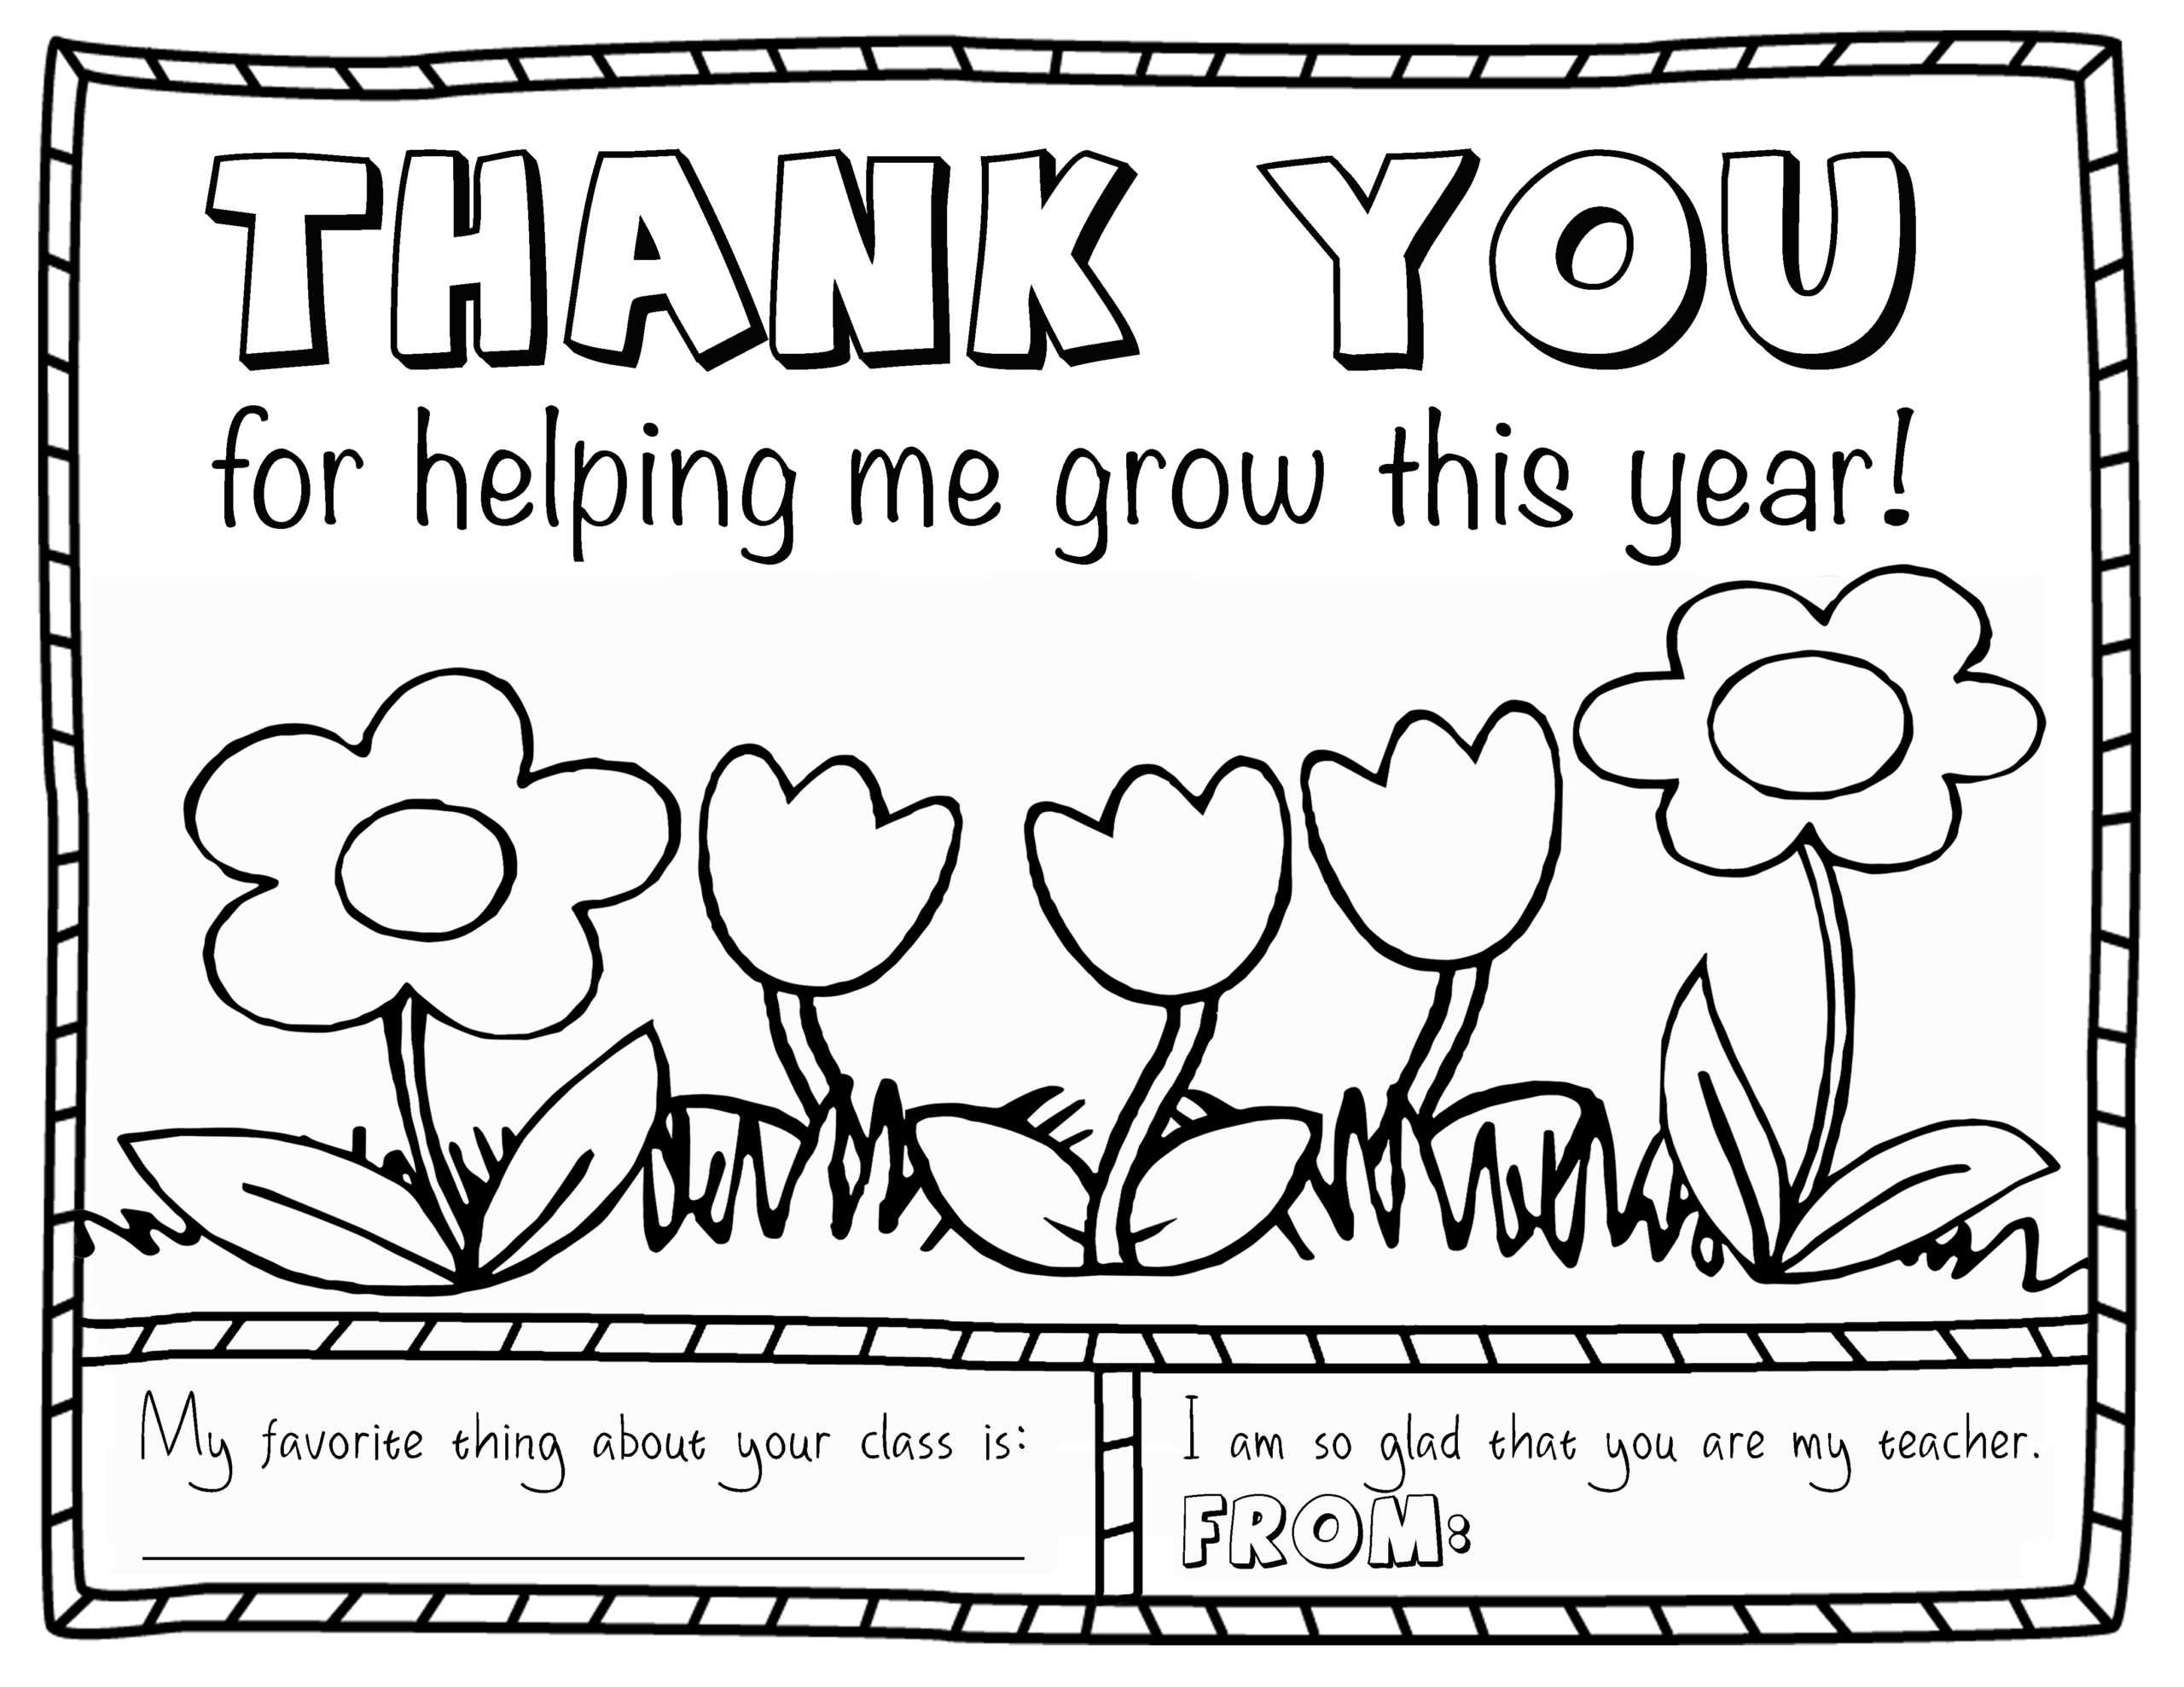 Coloring Pages : Coloring Book Thank You Card Beautifulble With Thank You Card For Teacher Template